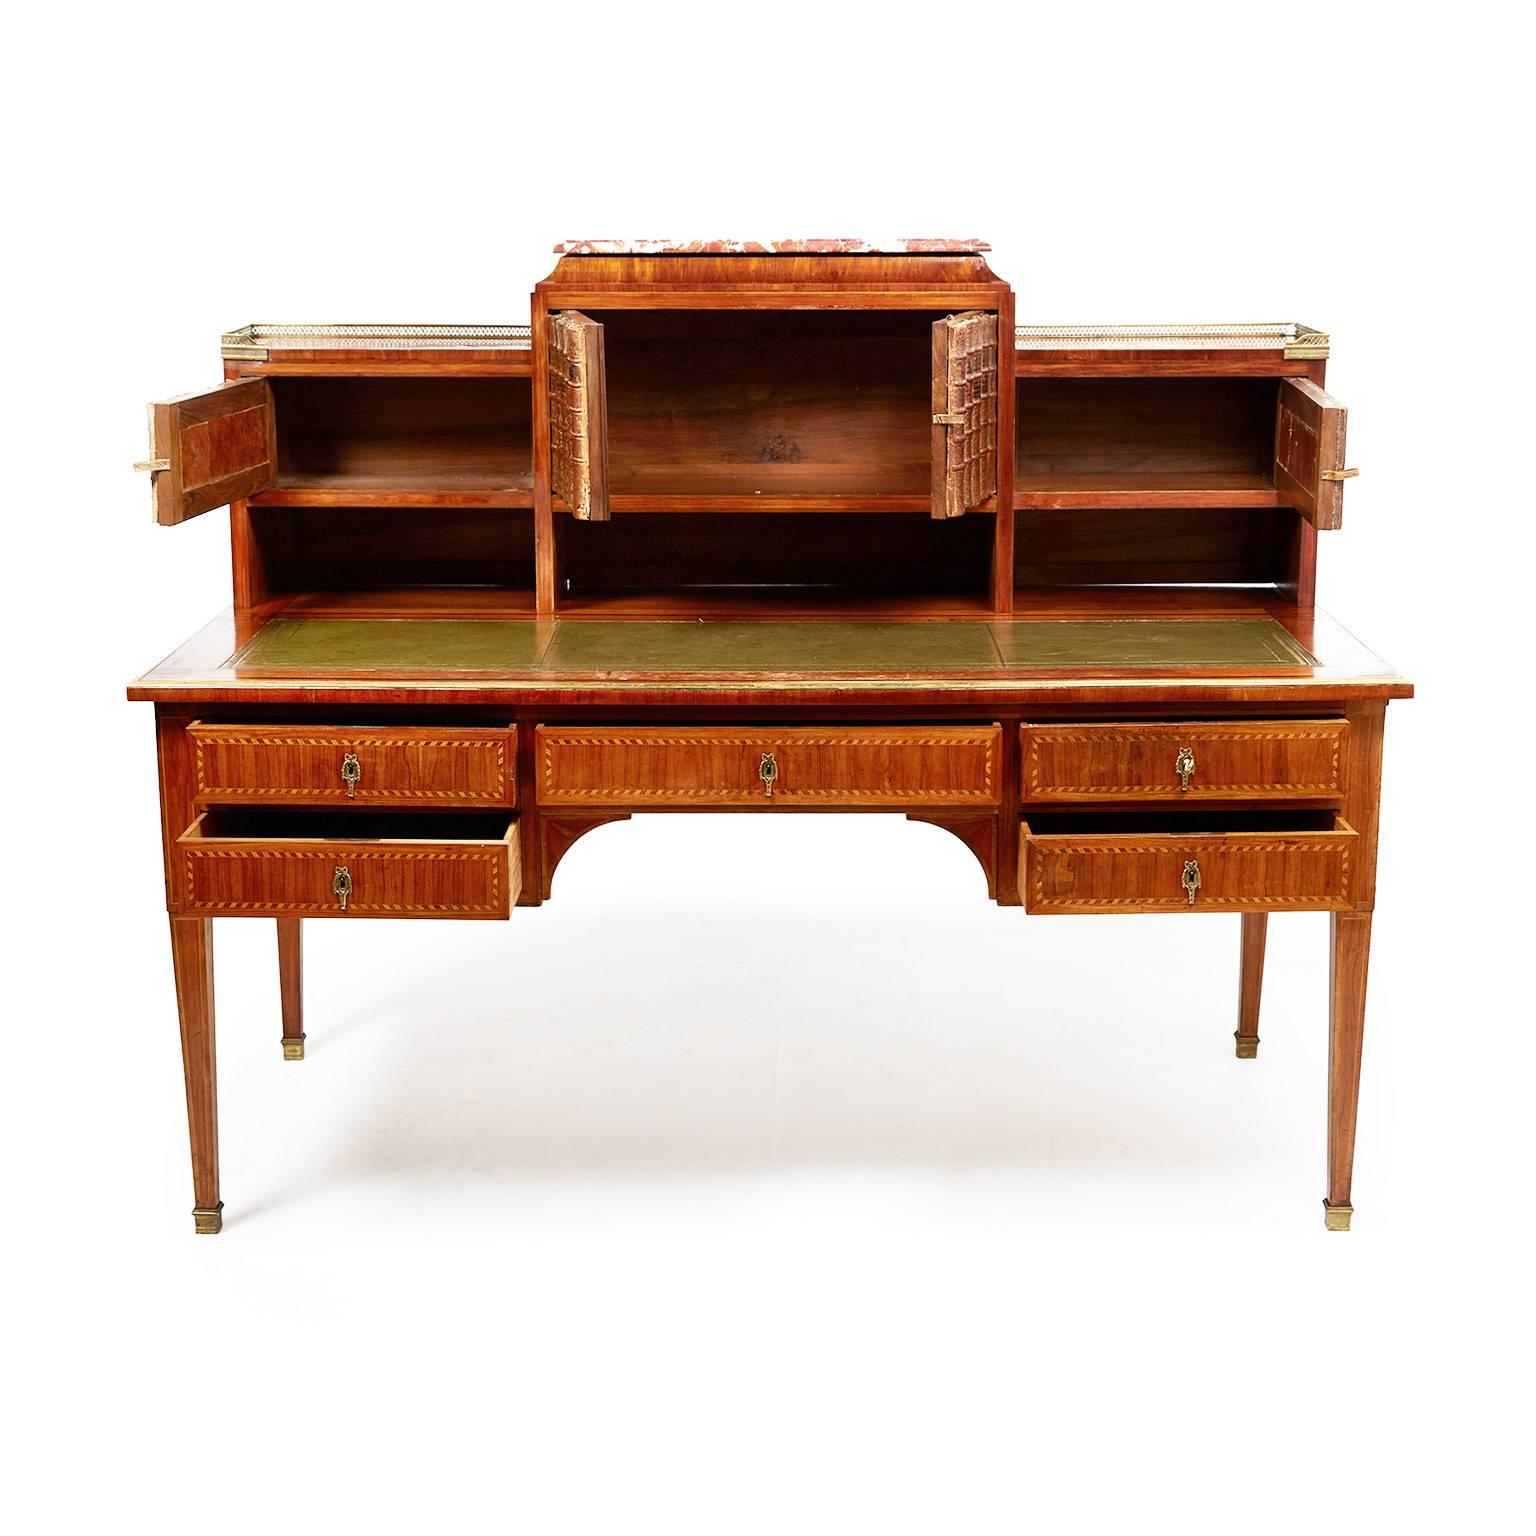 Superior quality 19th century, large French Louis XVI marquetry-and-inlay desk, with newly-replaced leather surface and 18th century book spines fronting the cupboard doors. With subtle brass accents, and crowned with a beautiful piece of marble,